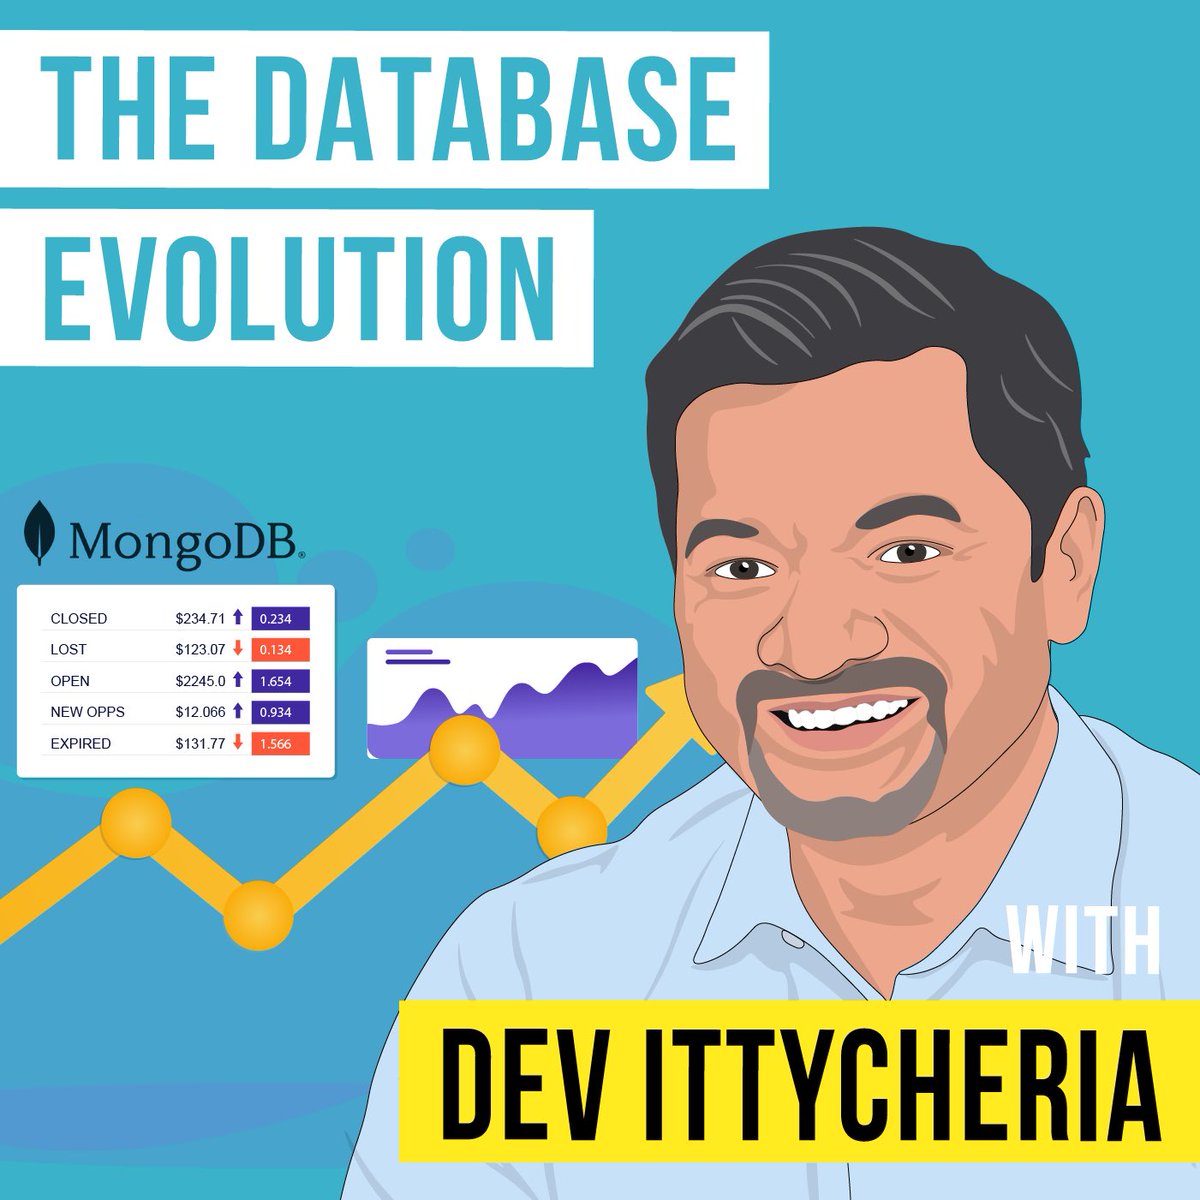 When you ask around about who the great active CEOs are, you hear @dittycheria’s name a lot MongoDB has grown tremendously under his long leadership, and we discuss all aspects of the business We also cover how he thinks the world is changing and what to do about it Enjoy!